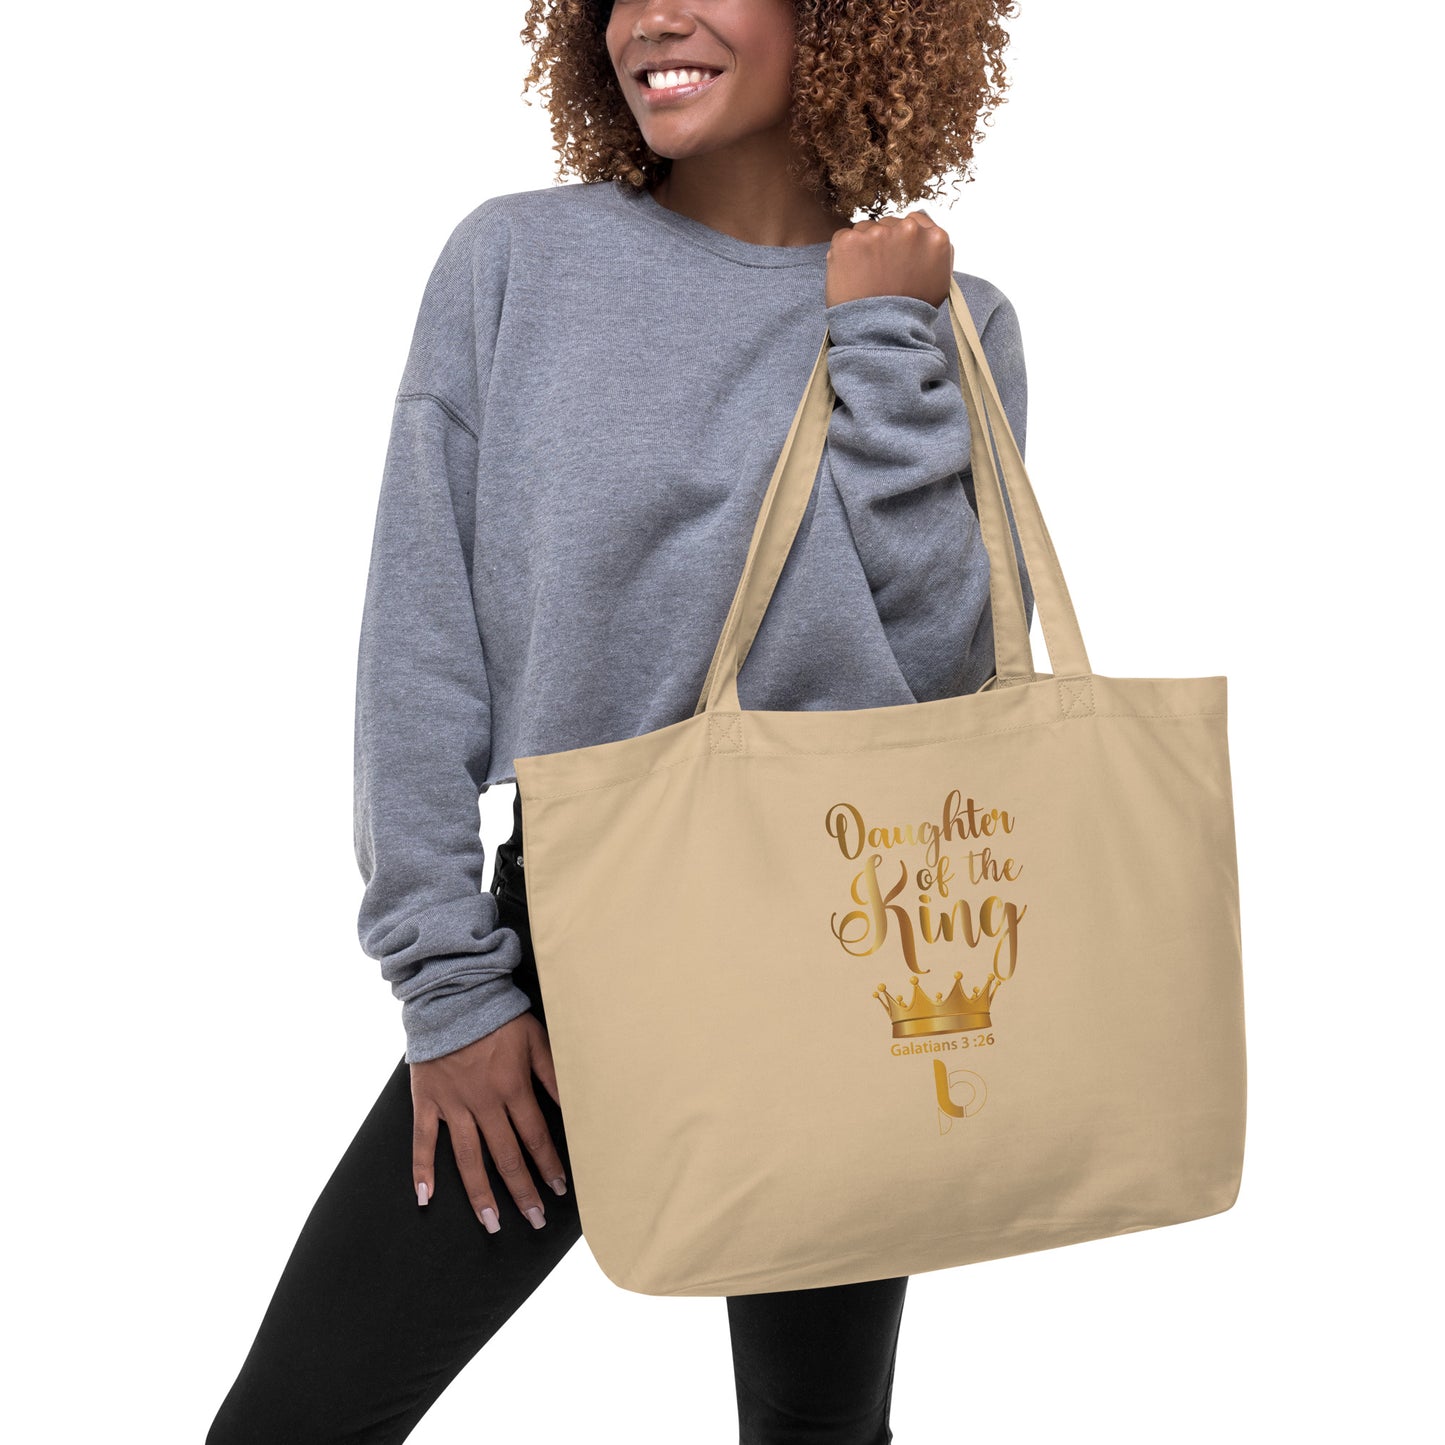 Daughter Of The King Tote